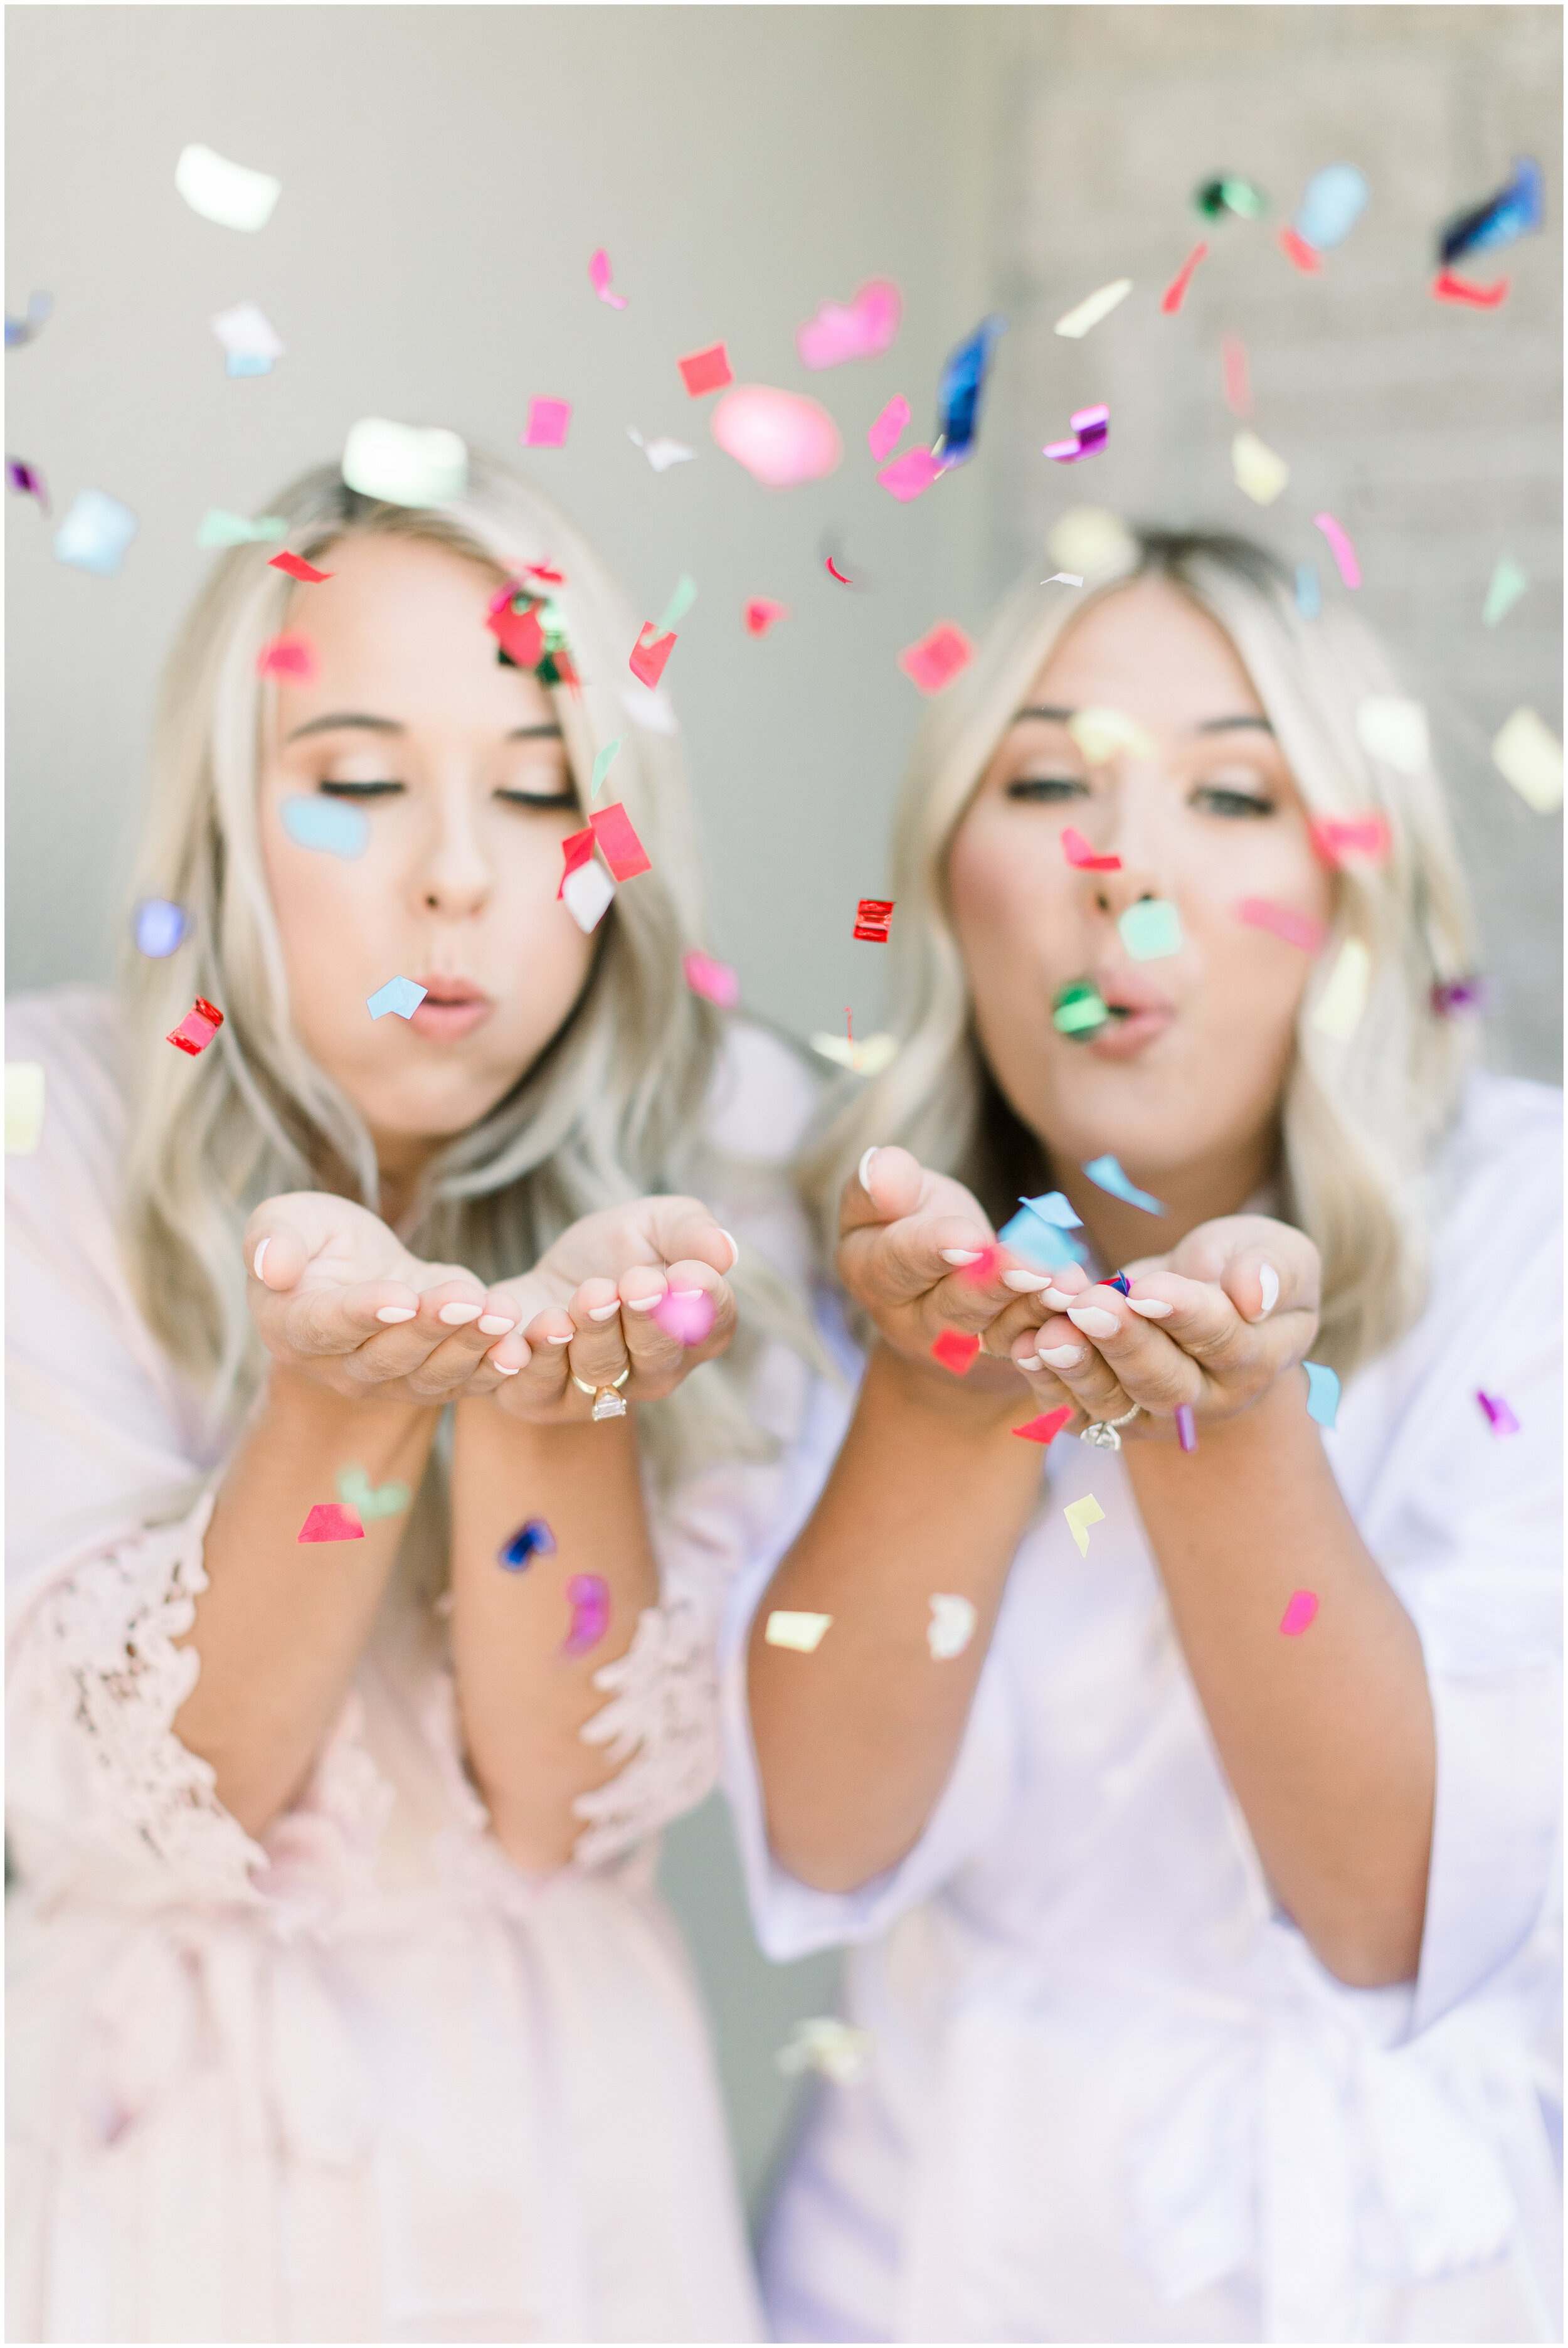  Bride and bridesmaid in silk robes with confetti in this boho wedding by Chelsea Mason Photography in Ottawa, ON. bridesmaid gifts bridesmaid robes bridesmaid mathcing robes outfit inspo confetti for wedding outdoor backyard wedding bridesmaid and b